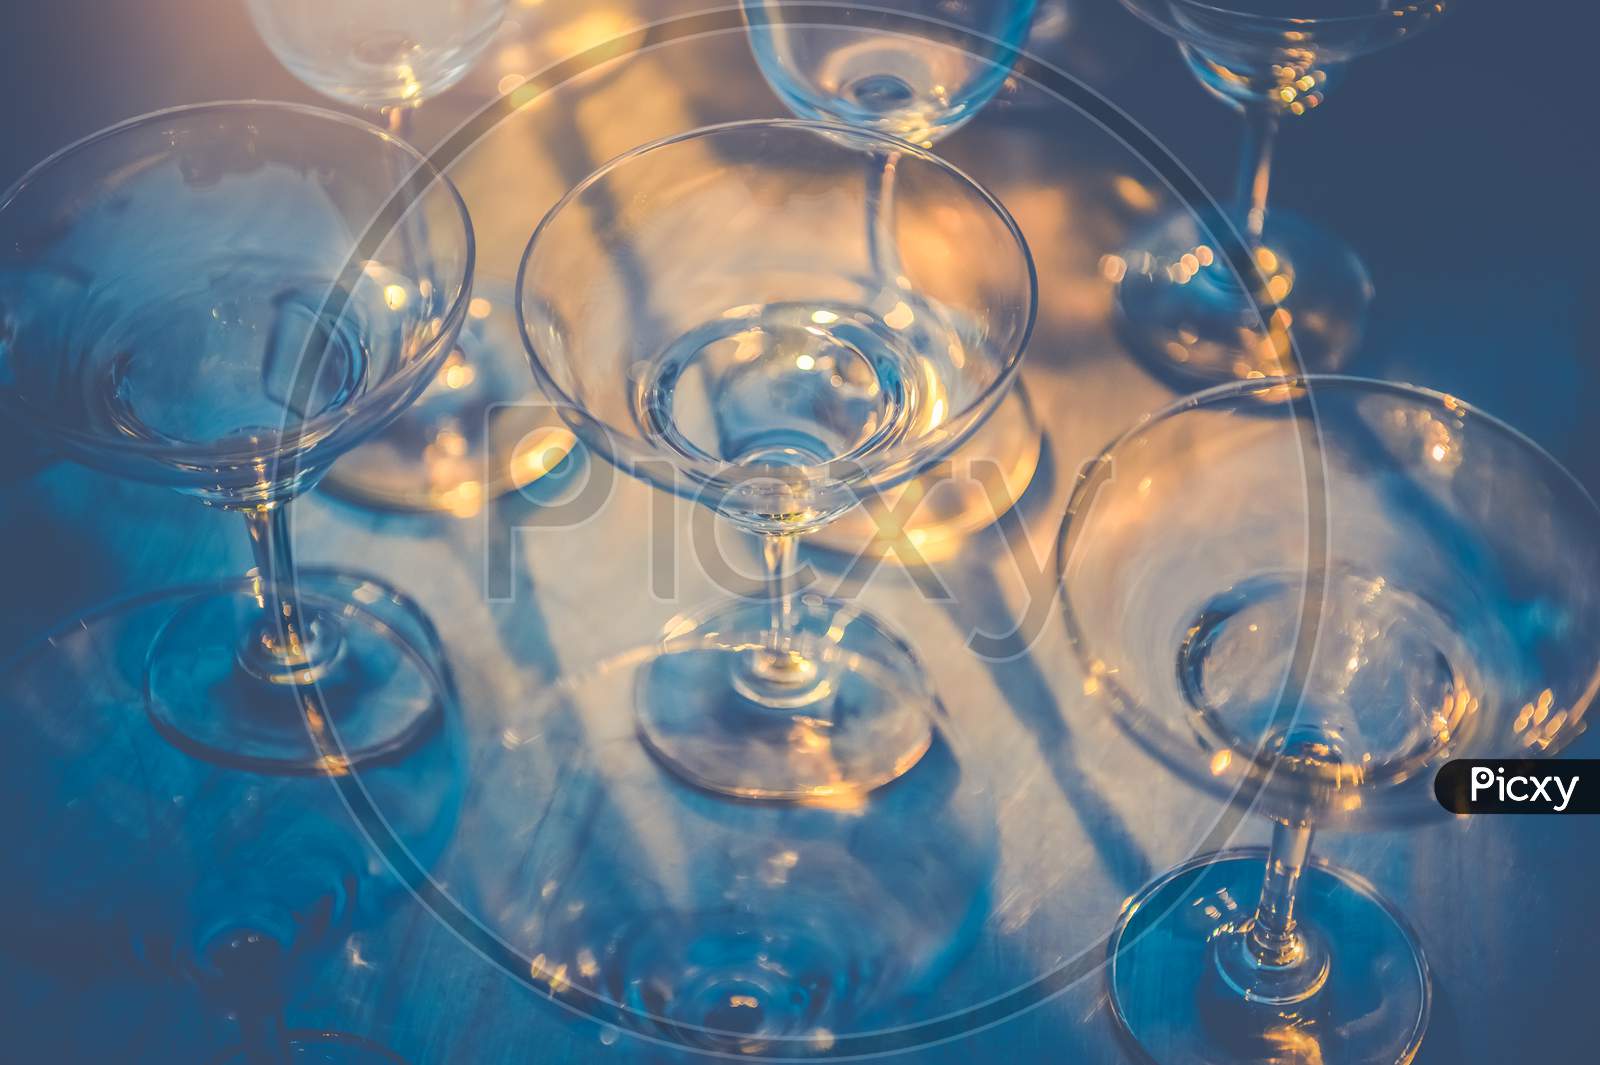 Row Of Wineglasses On Table In Nightclub Bar And Pub Restaurant. Glassware And Drinking Beverage Concept